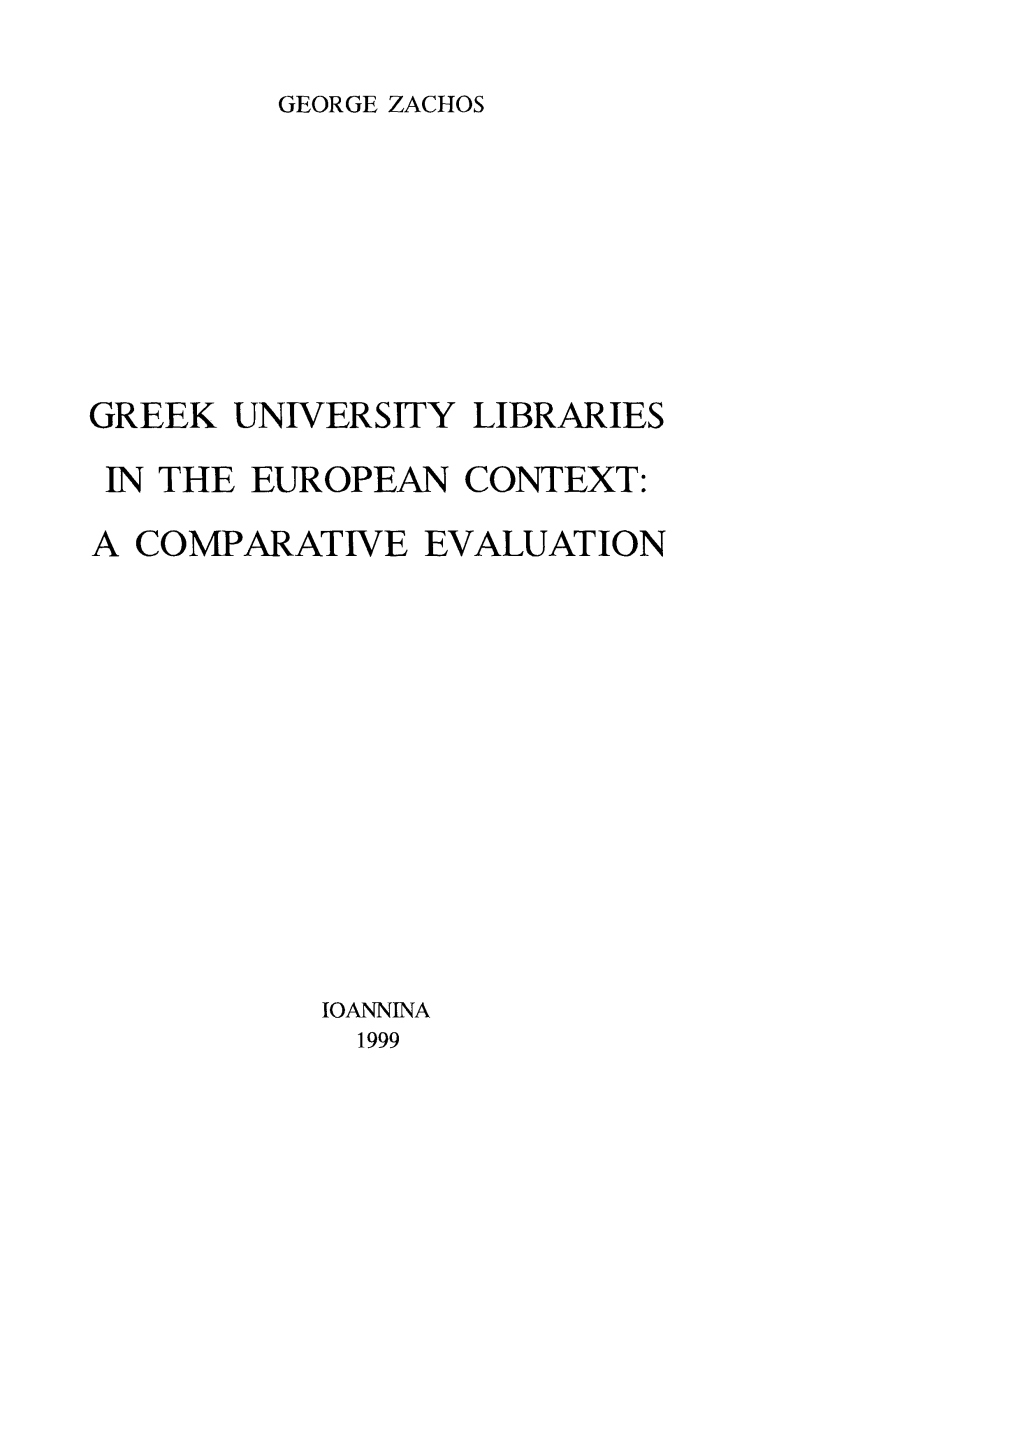 Greek University Libraries in the European Context: a Comparative Evaluation